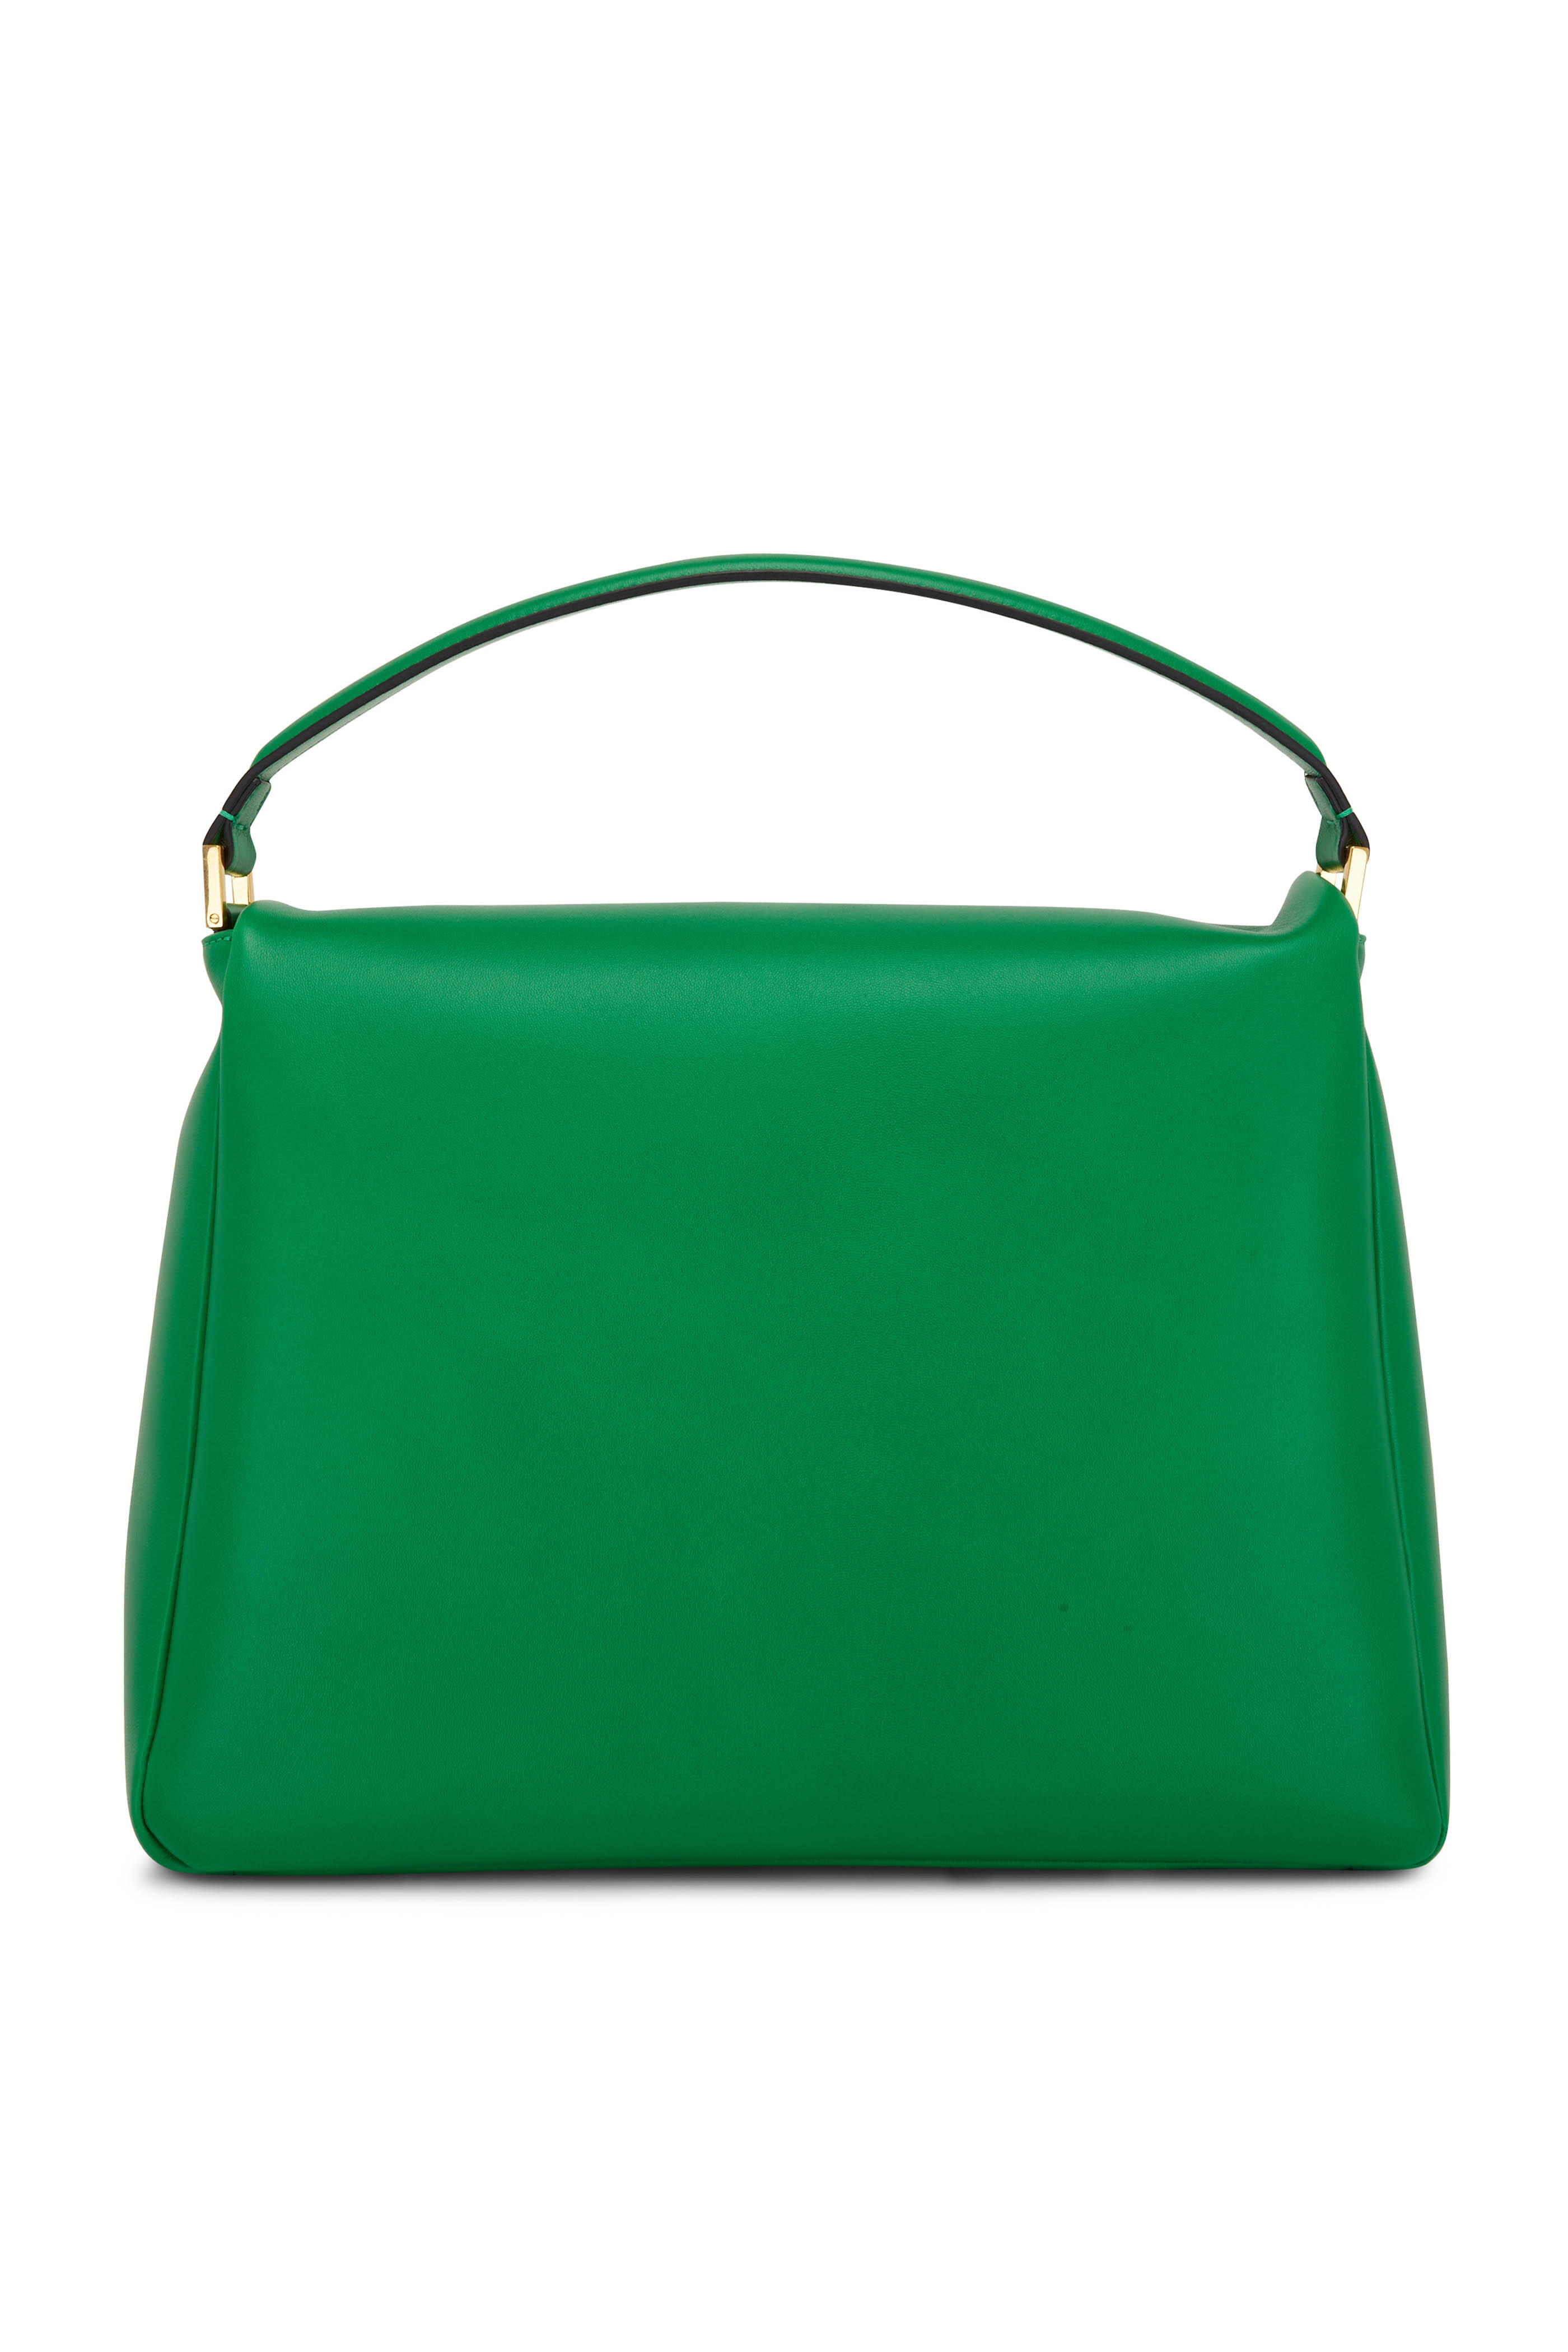 Valentino Garavani Women's One Stud Green Nappa Leather Maxi Top Handle Bag | by Mitchell Stores